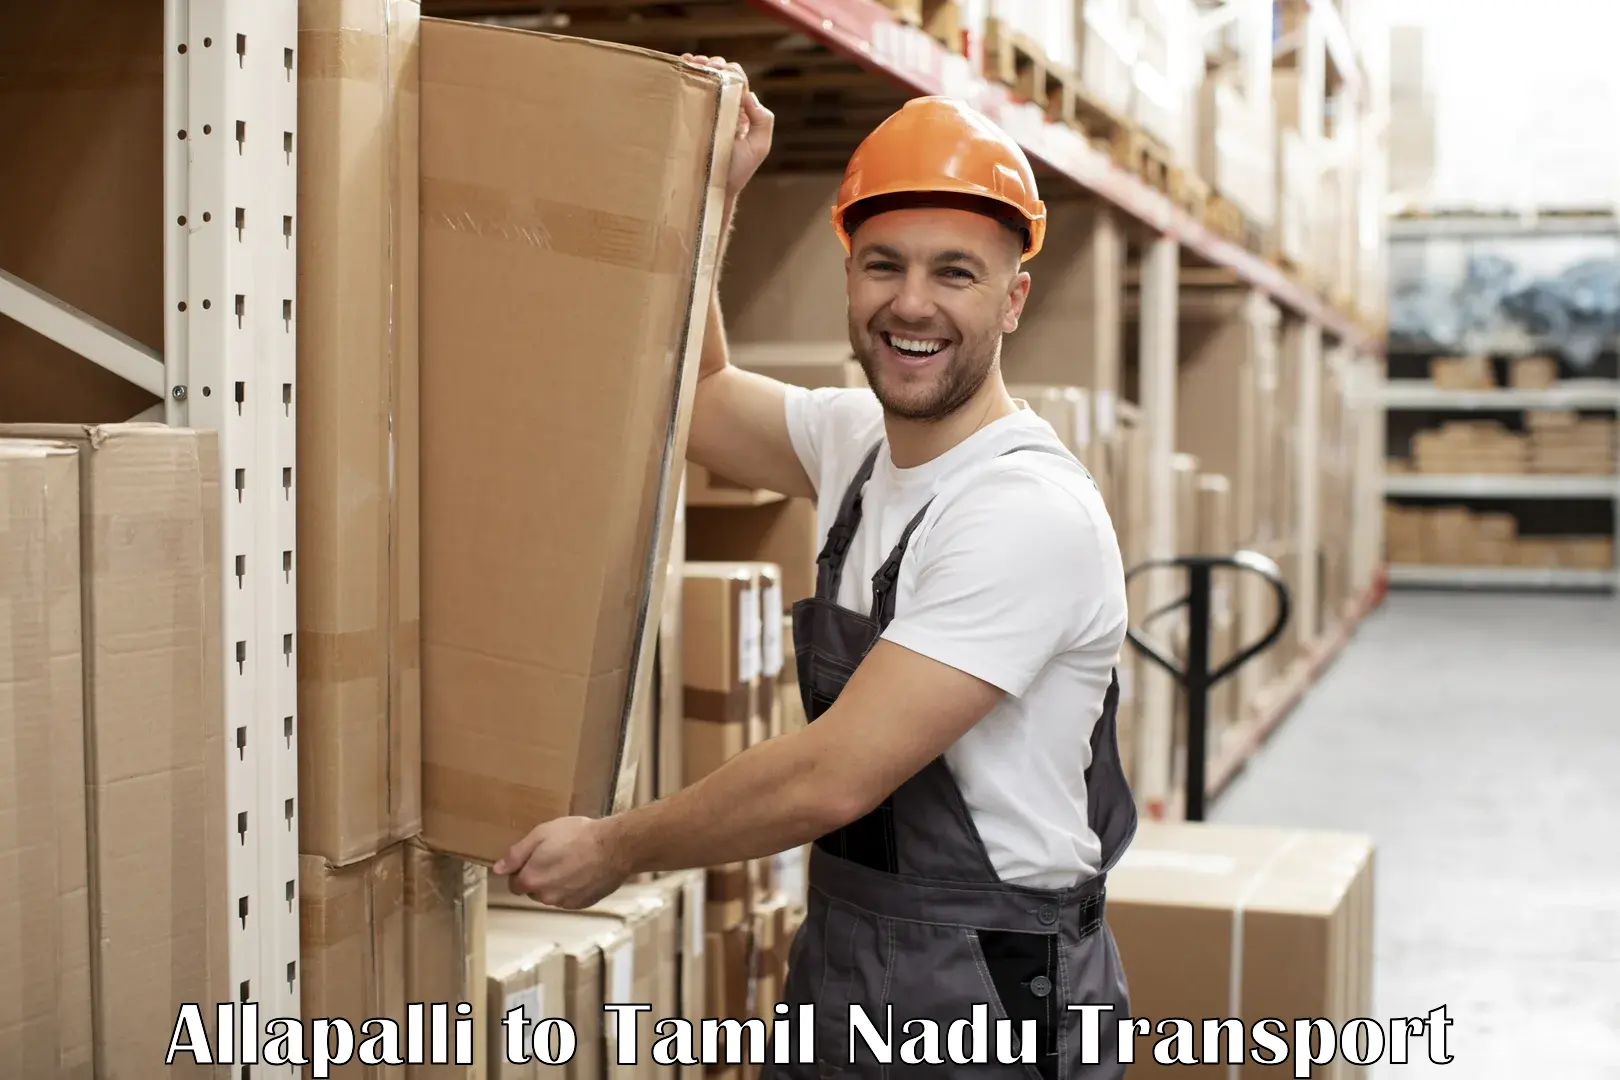 Road transport services in Allapalli to Ennore Port Chennai